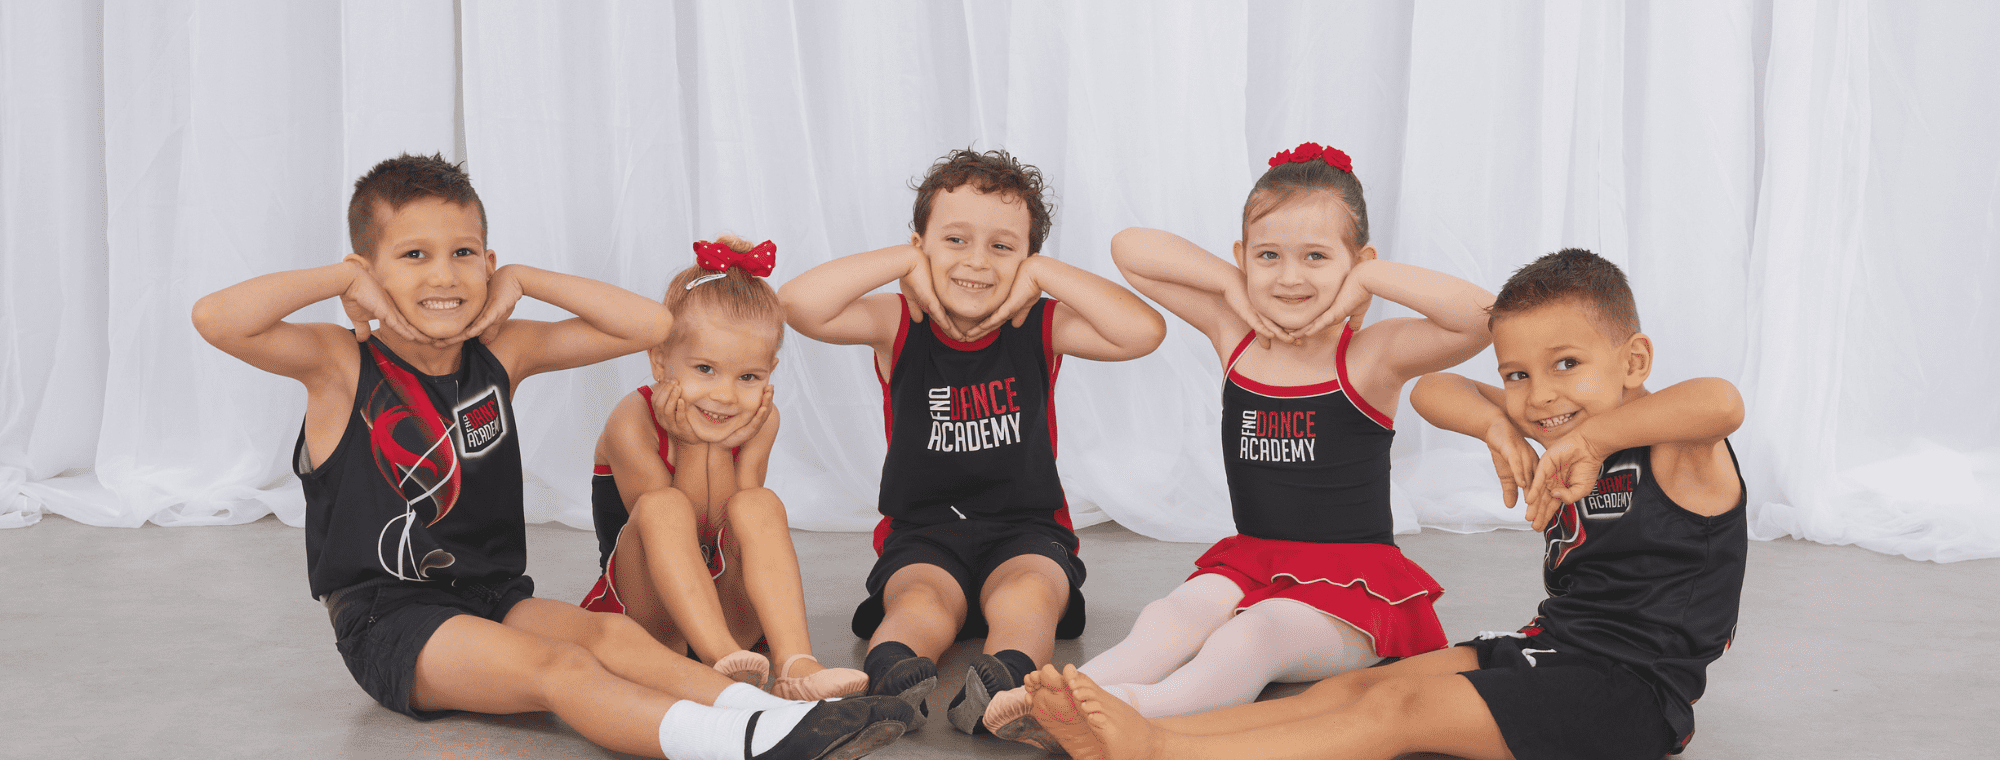 How to Decide Which Dance School is Right for Your Child?